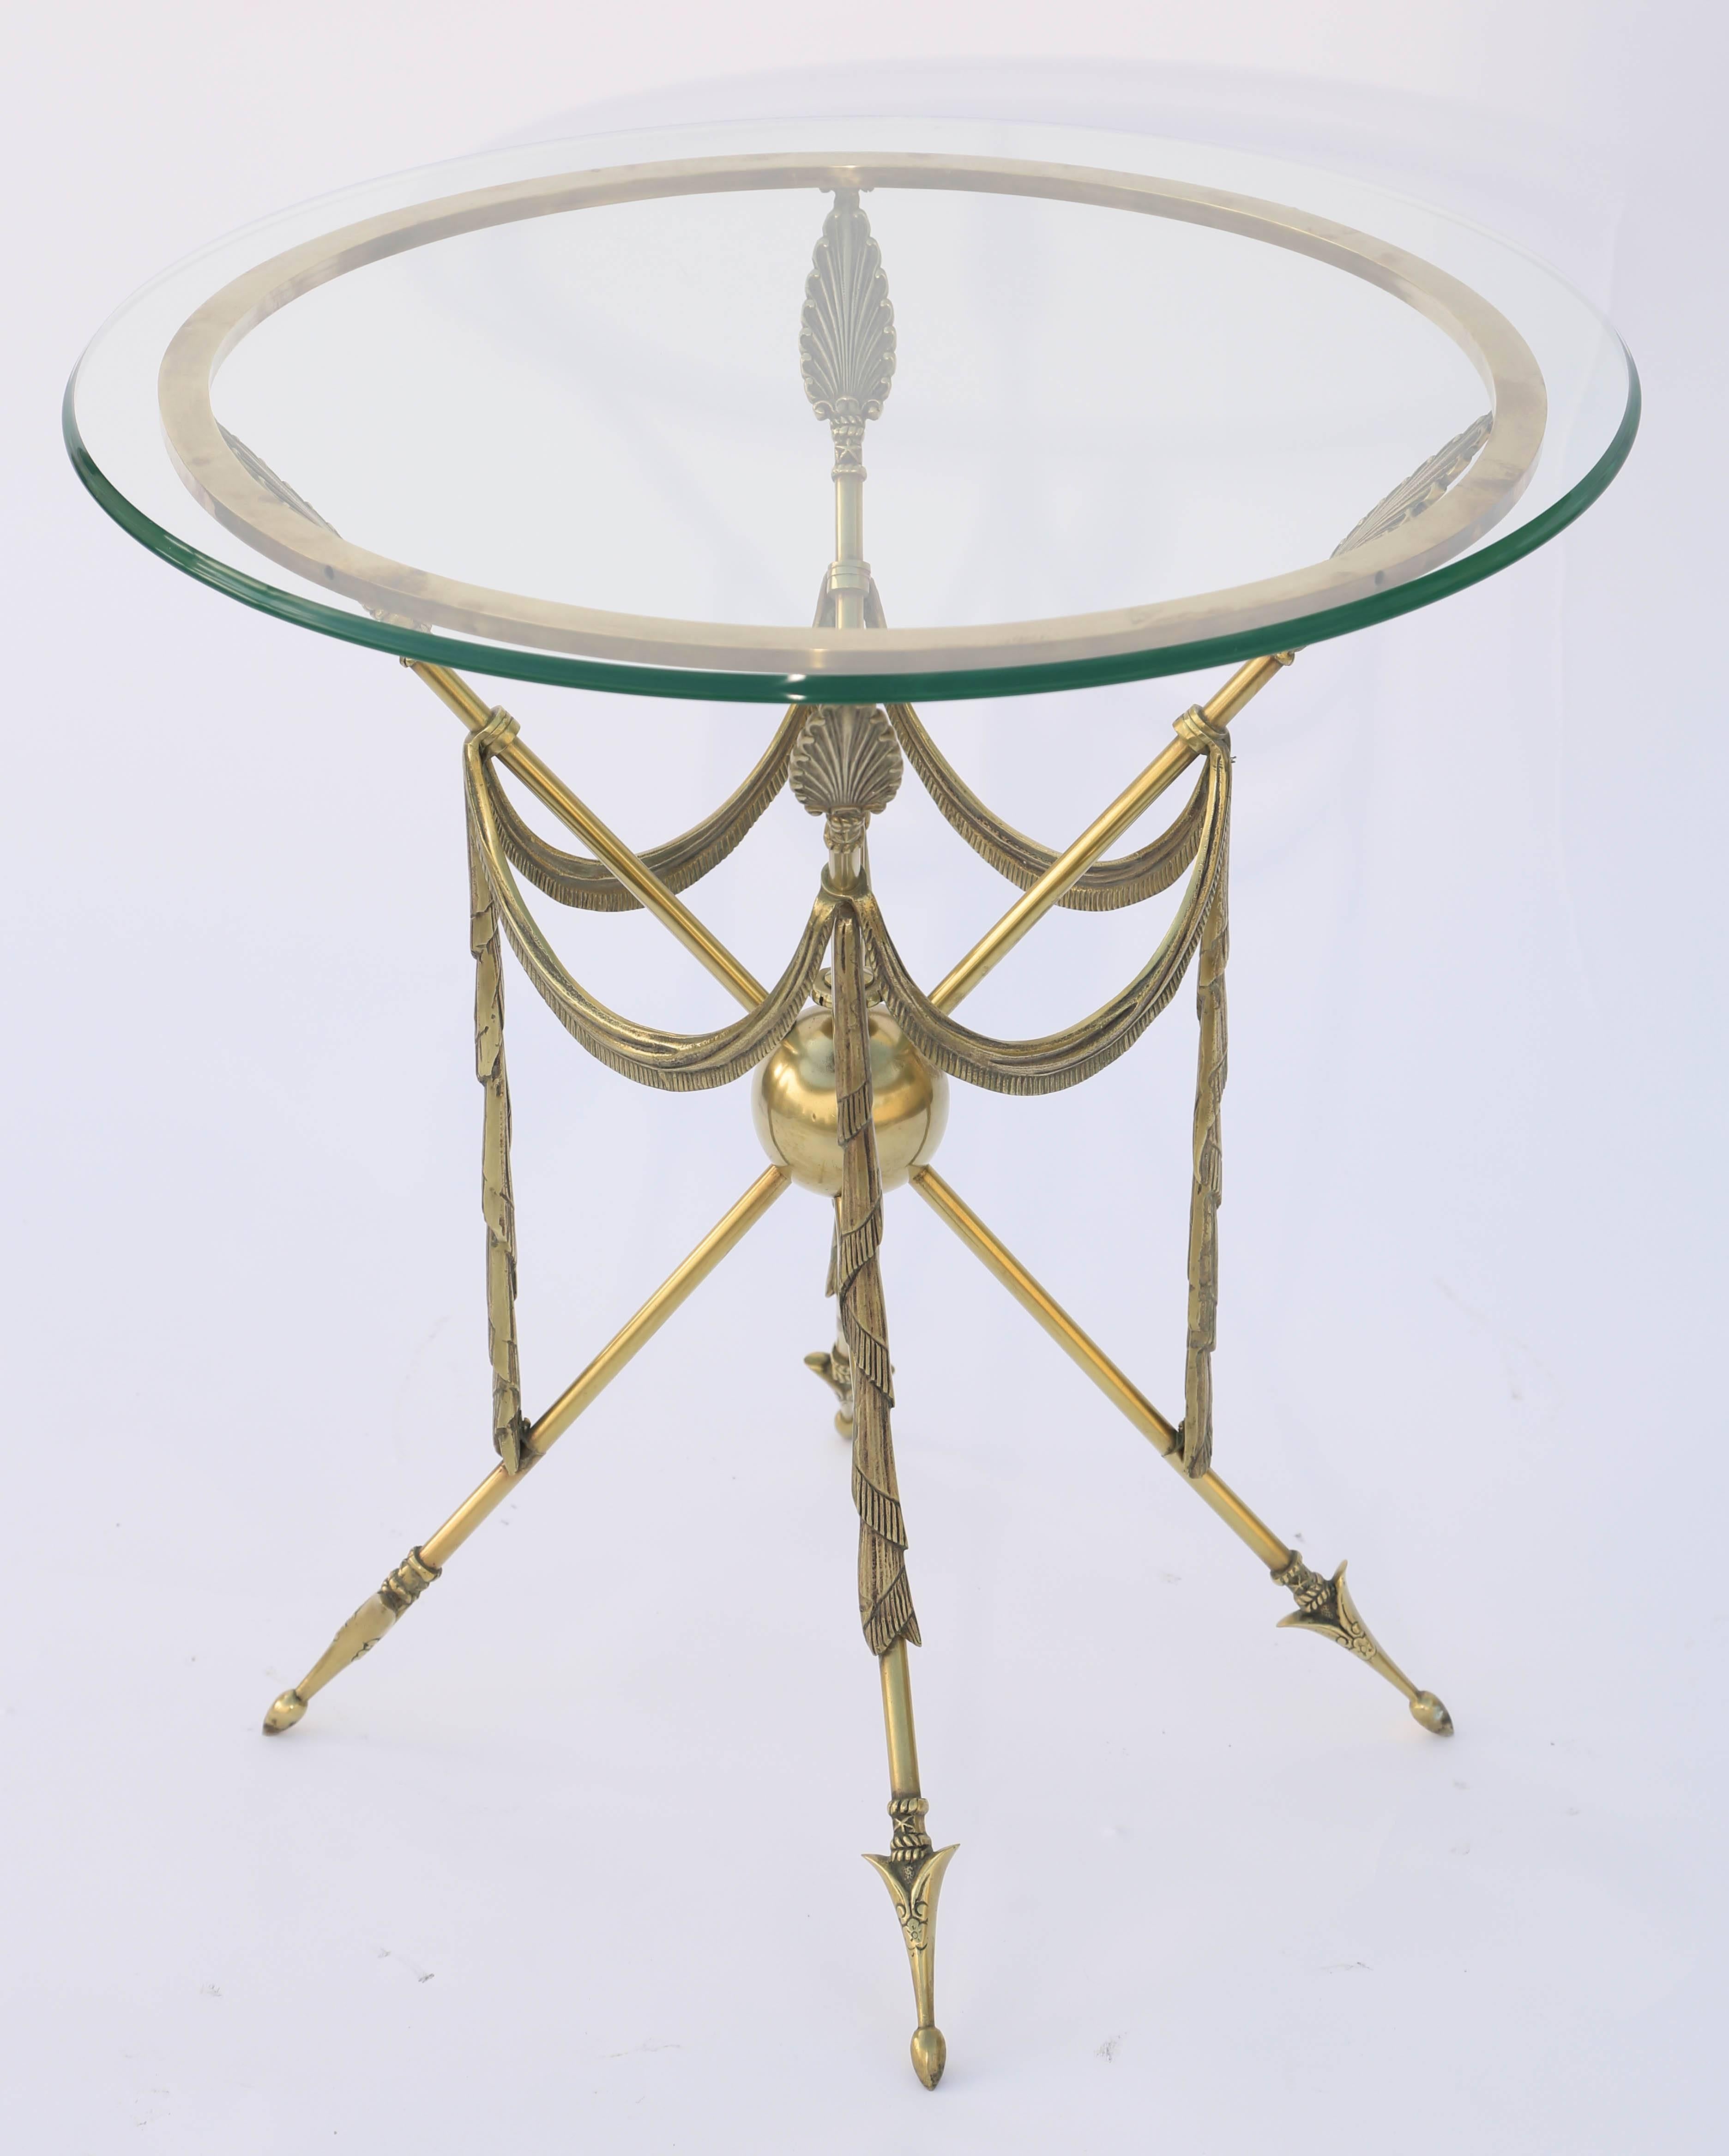 Occasional end table, of brass, having a round glass top, on conforming ring, raised on four, arrow-form, legs, draped with swagged festooning.

Stock ID: D3588